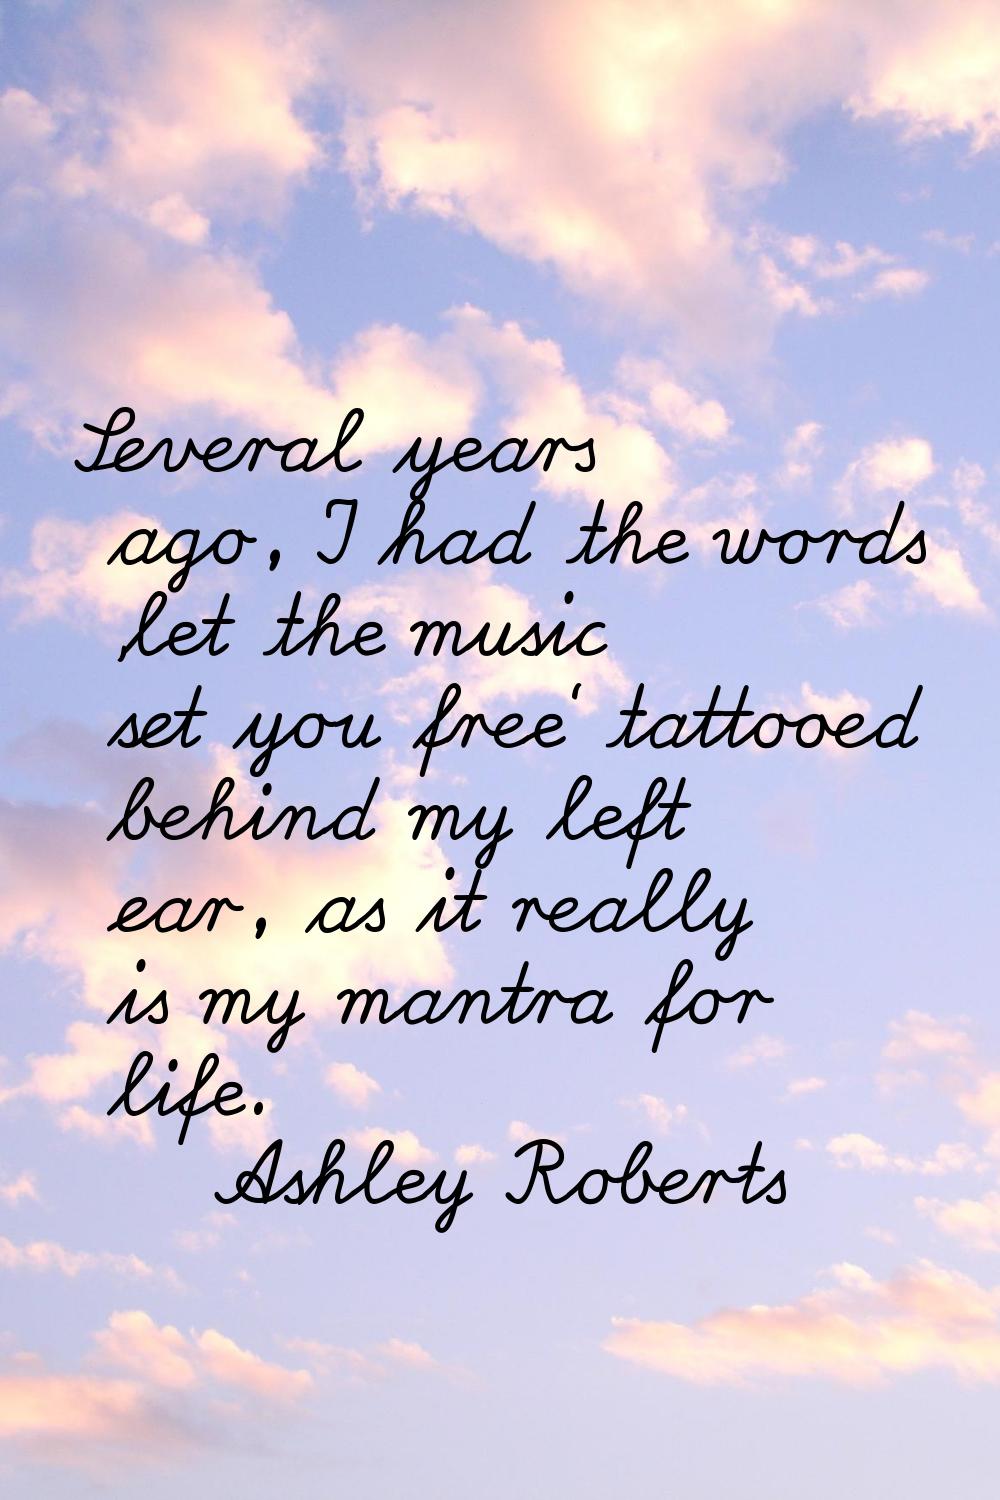 Several years ago, I had the words 'let the music set you free' tattooed behind my left ear, as it 